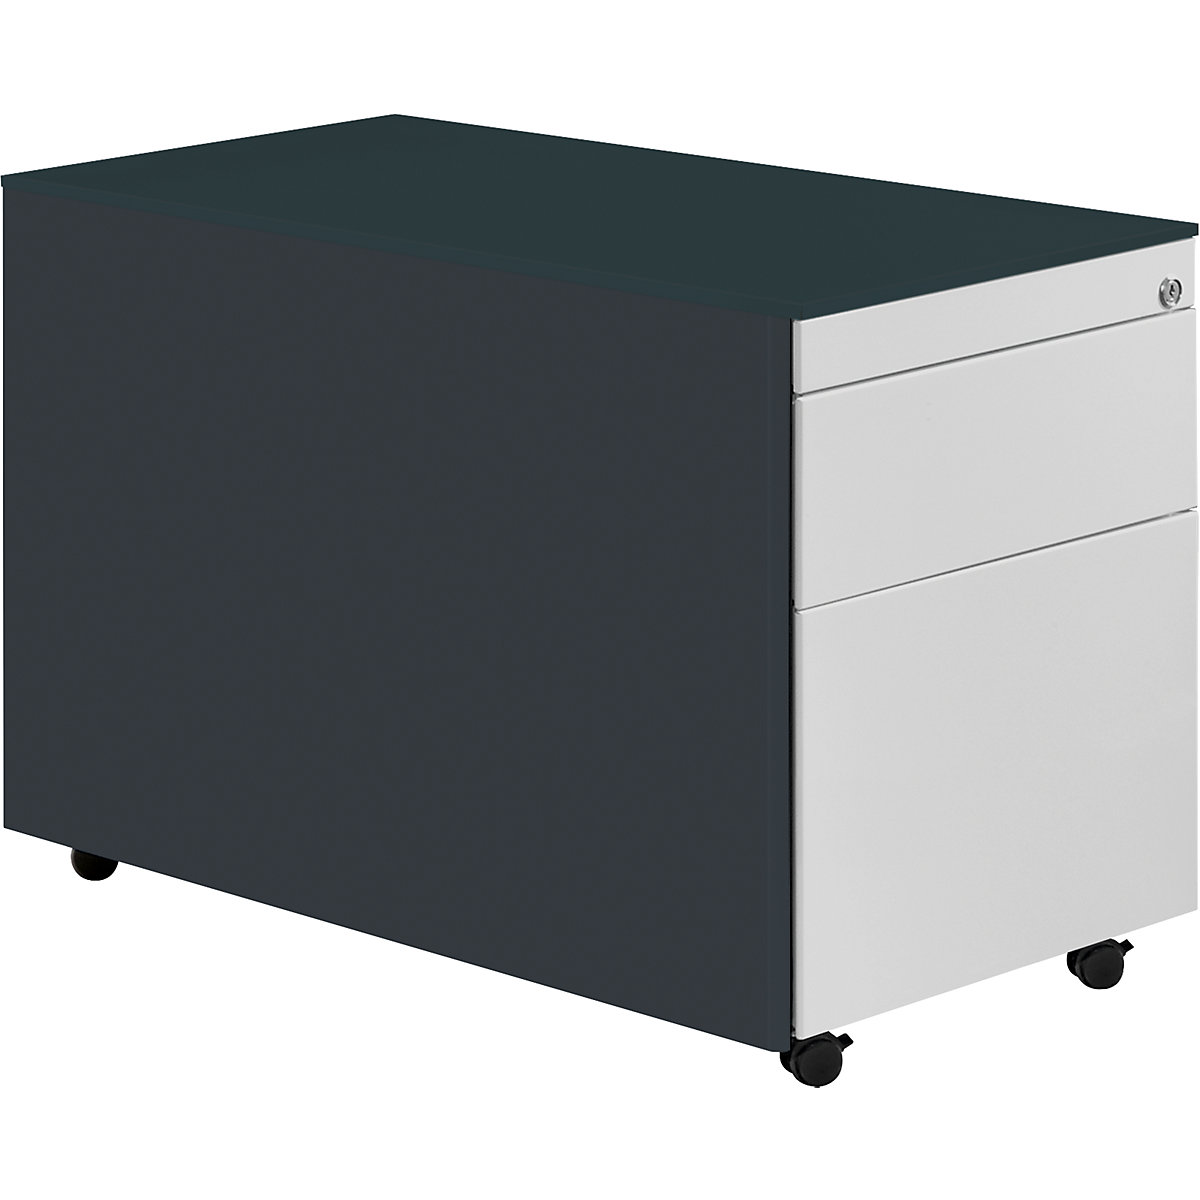 Drawer pedestal with castors – mauser, HxD 570 x 800 mm, 1 drawer, 1 suspension file drawer, charcoal / light grey / charcoal-7